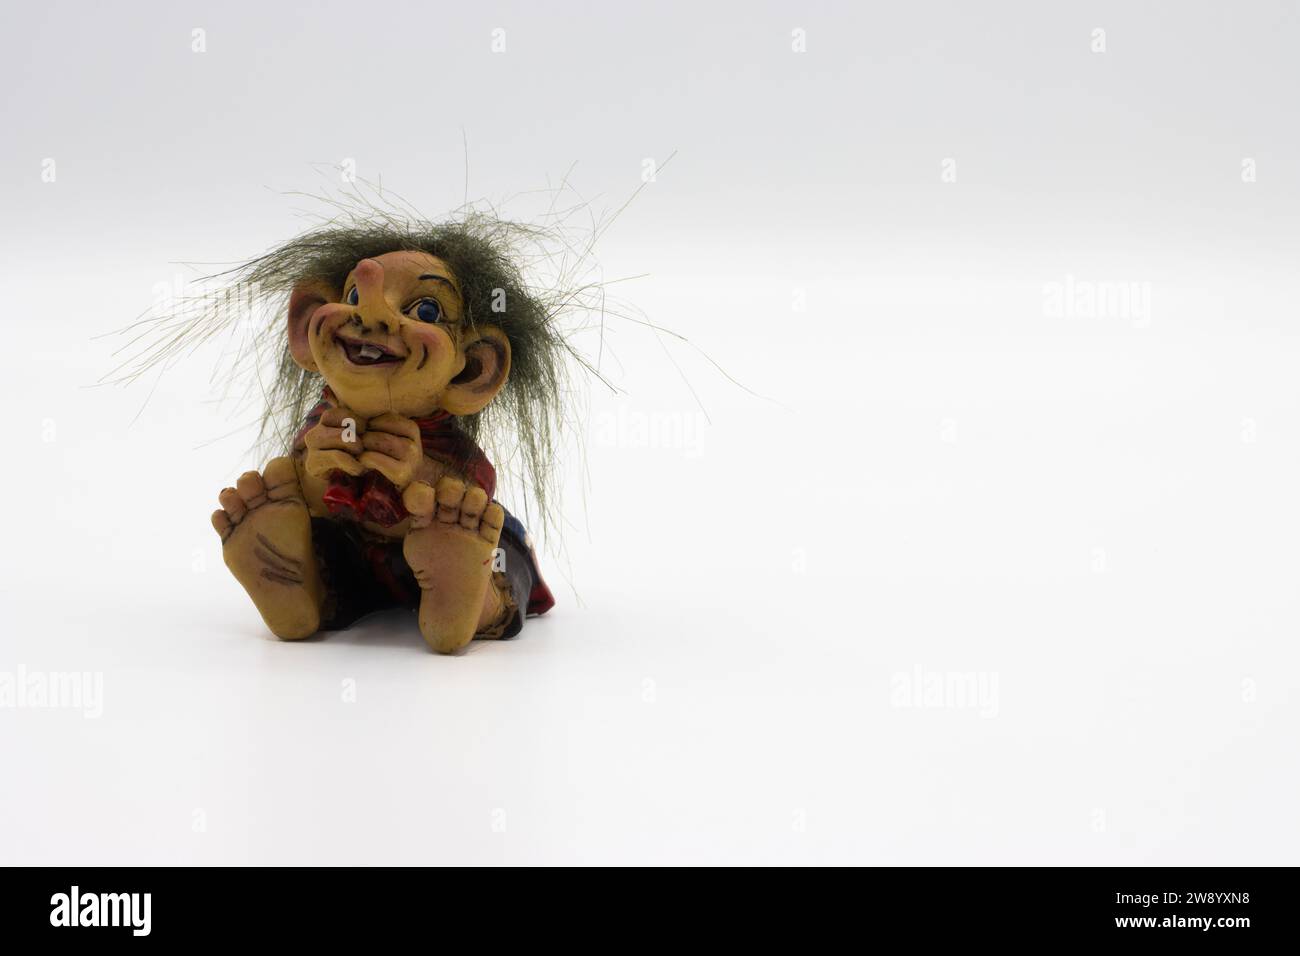 Ugly dirty troll toy from Norway Stock Photo